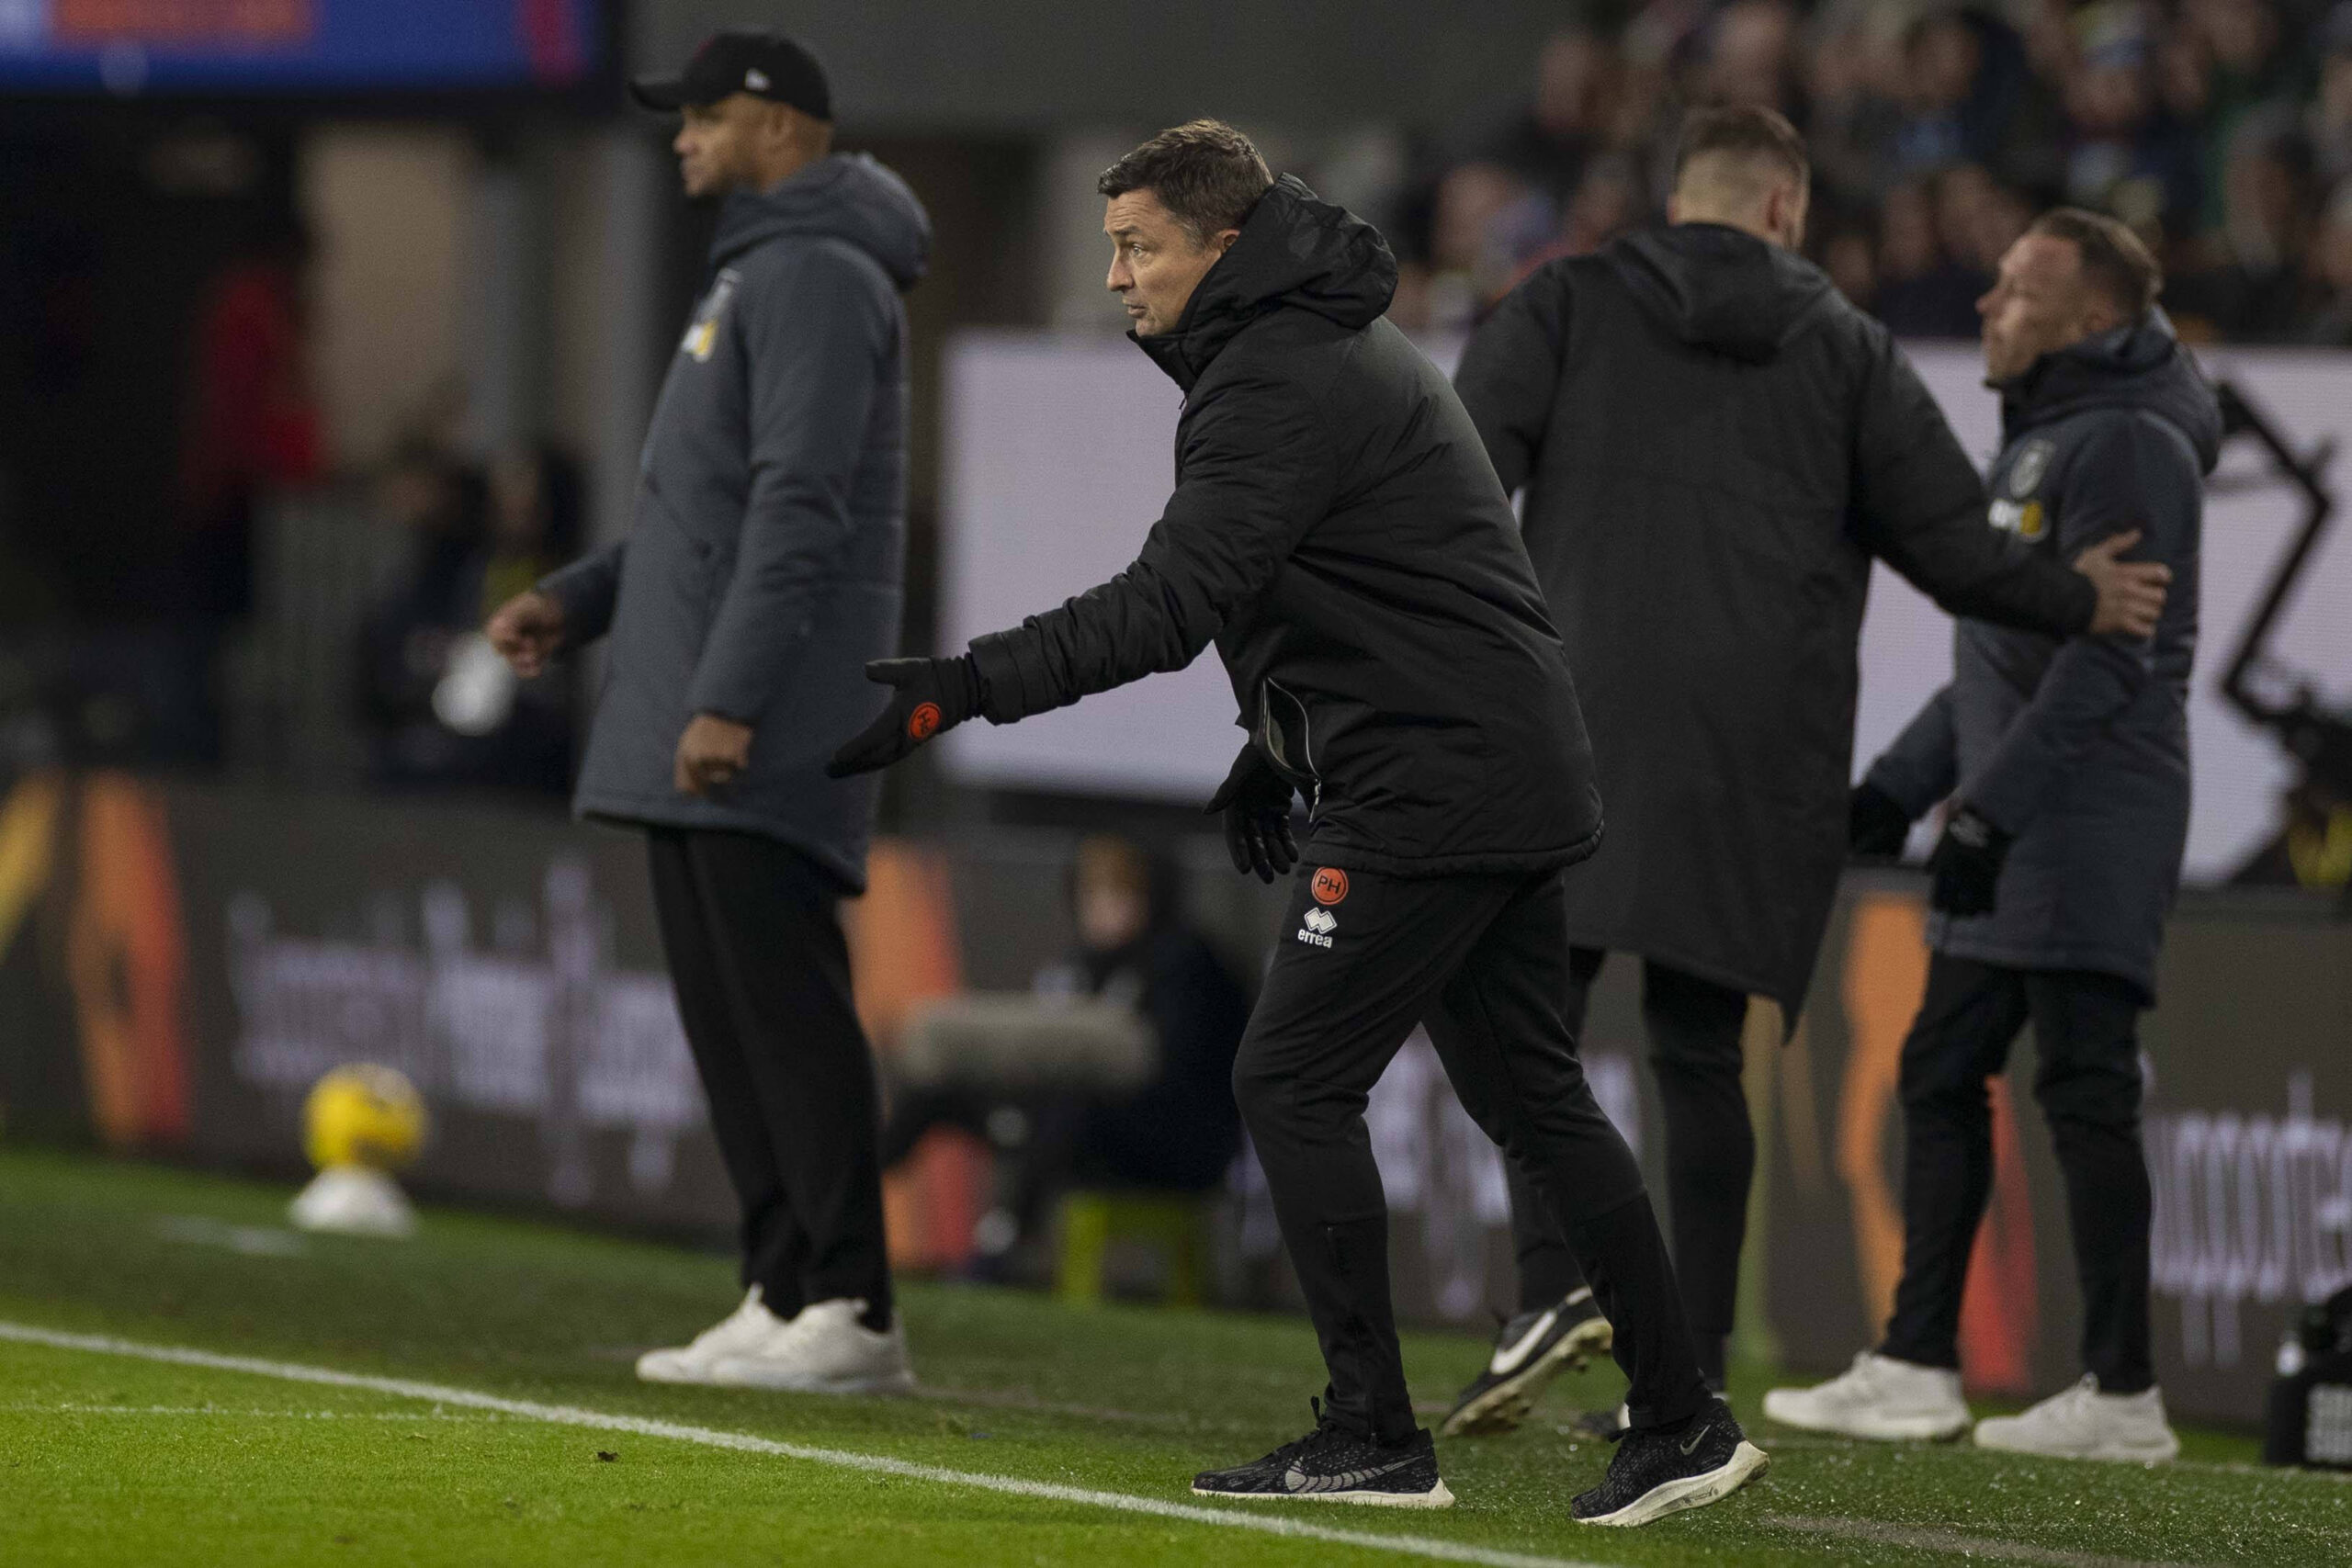 Paul Heckingbottom gives his team instructions from the sideline